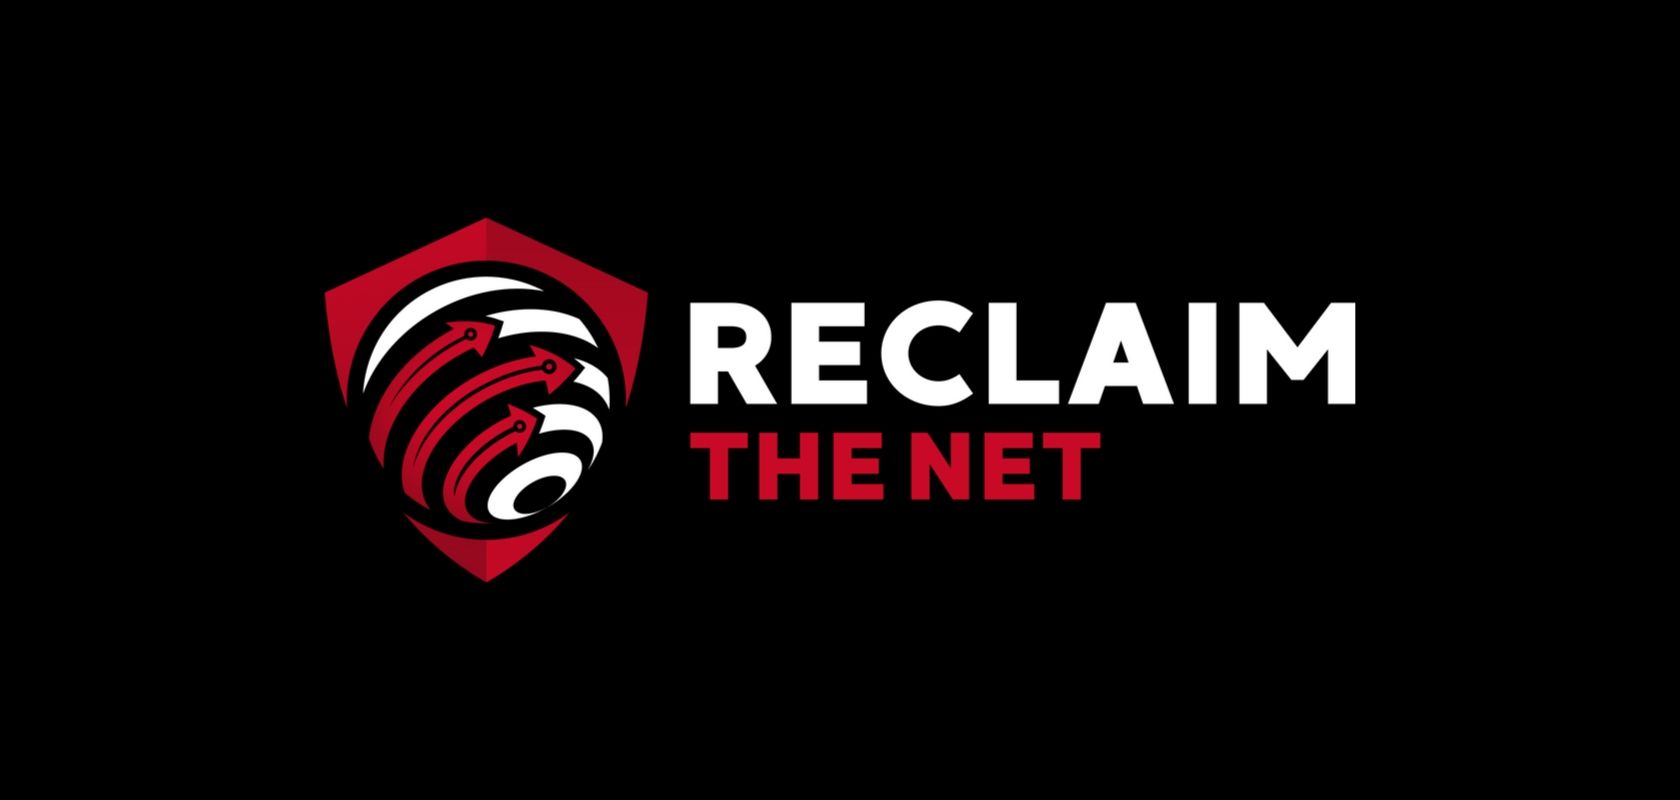 Reclaim The Net – Become a Member